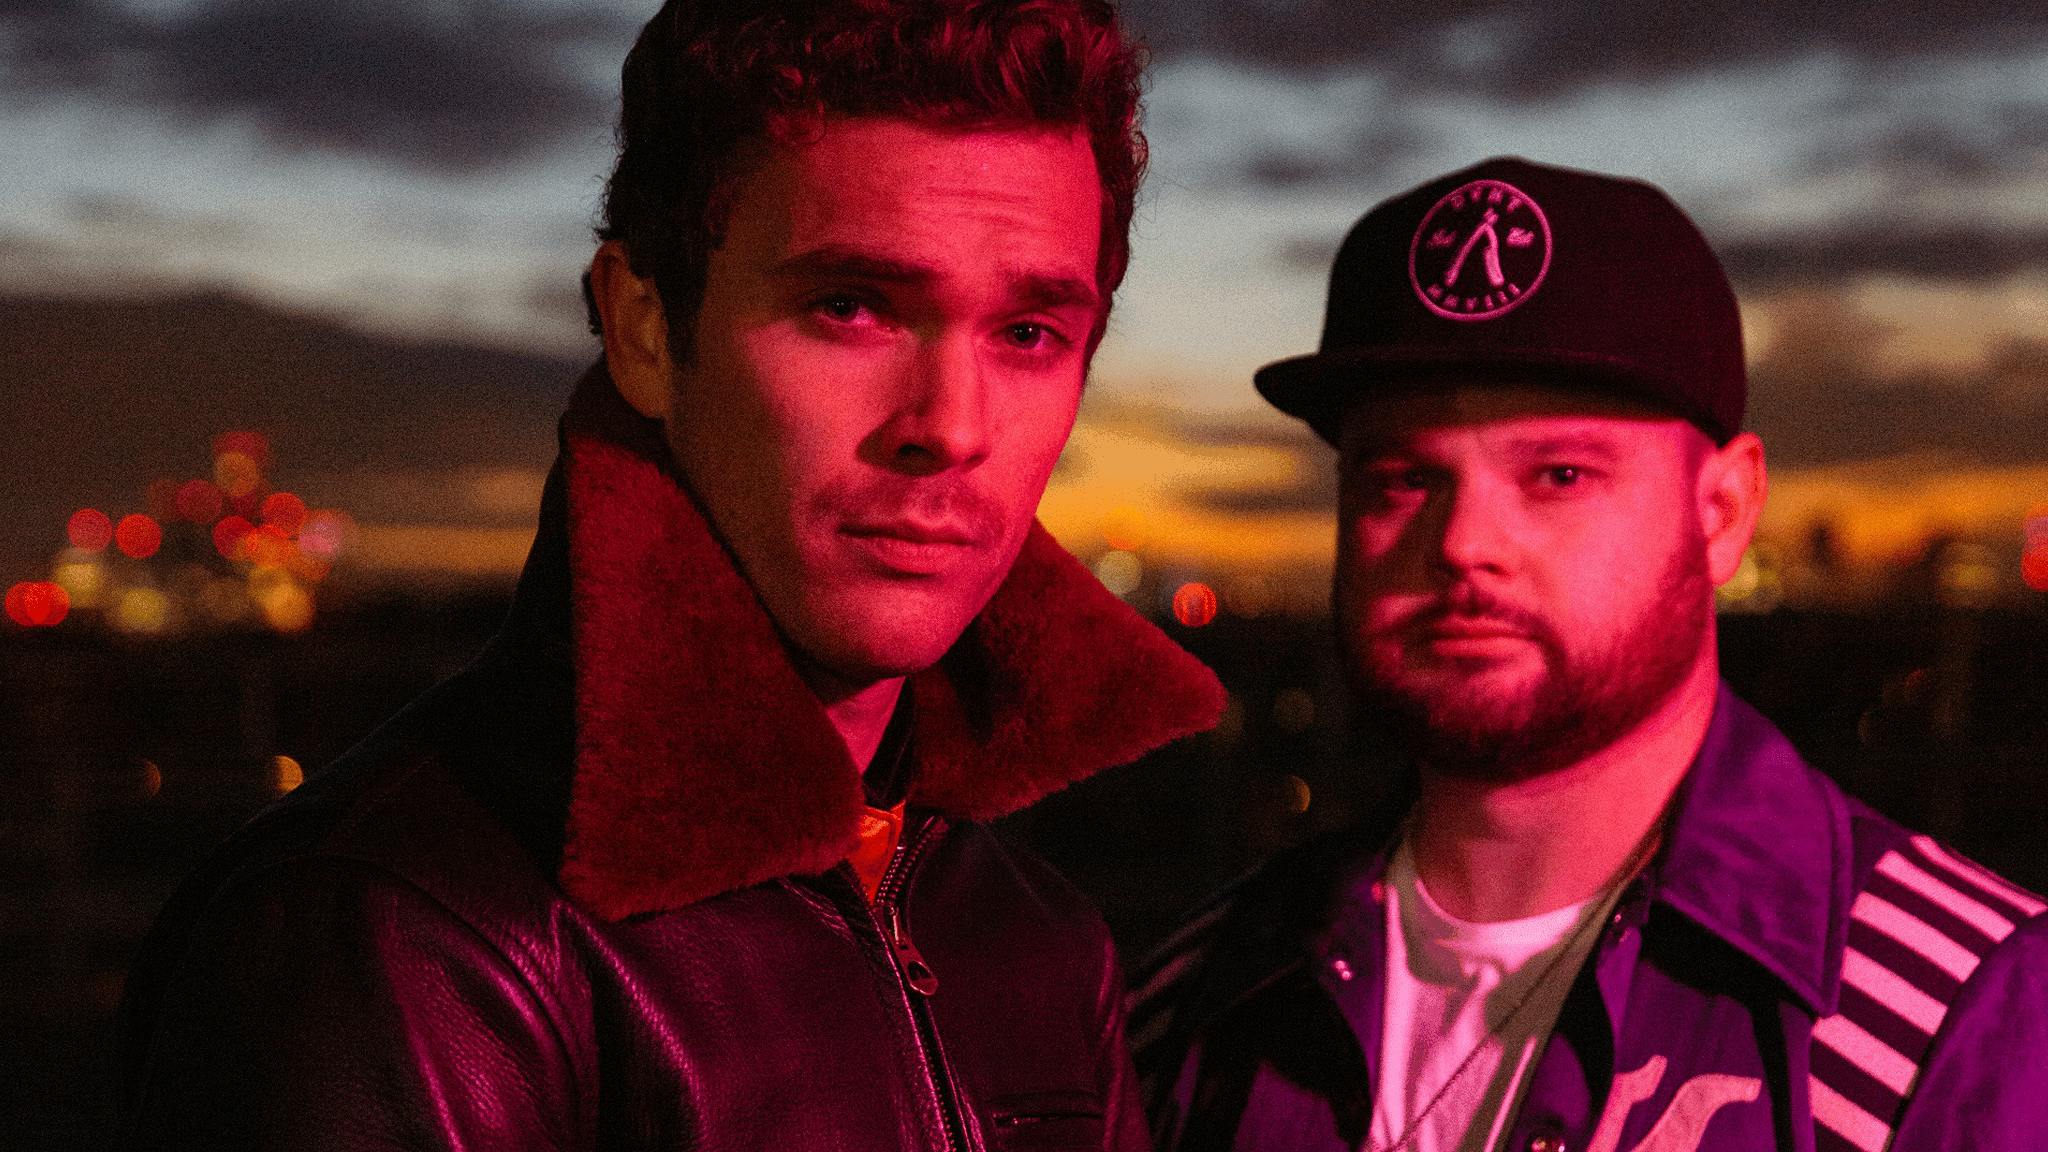 Royal Blood have announced a couple of intimate shows